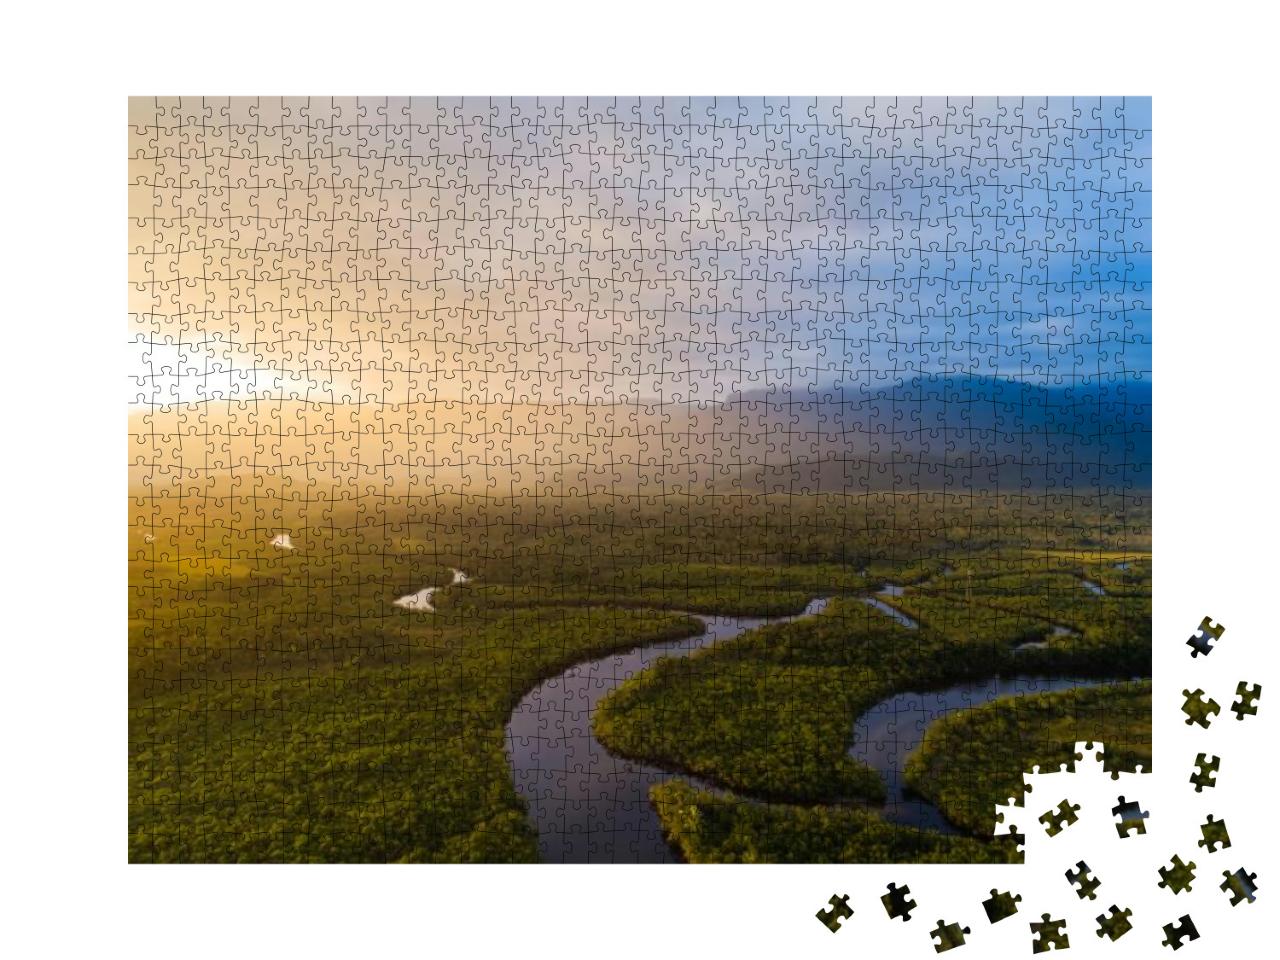 Amazon Rainforest in Brazil... Jigsaw Puzzle with 1000 pieces